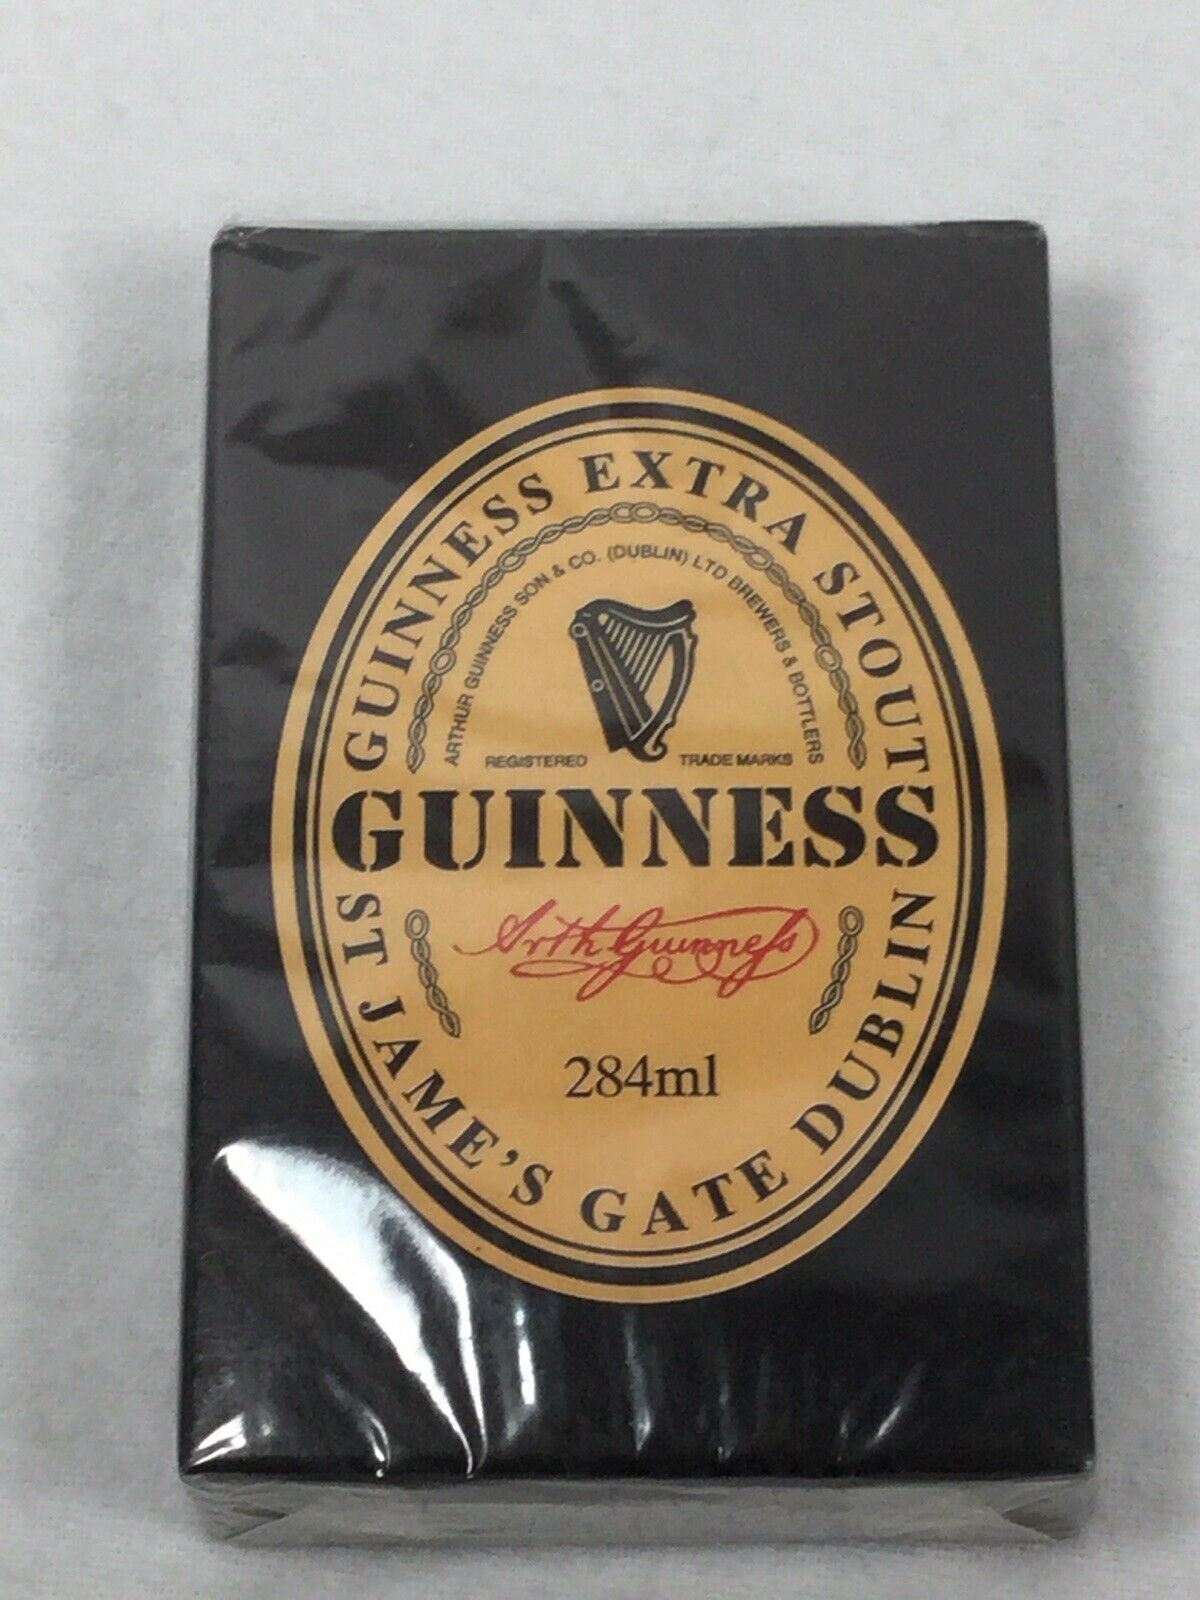 Guinness Playing Cards New Sealed Extra Stout Beer Deck St Jame’s Gate Dublin